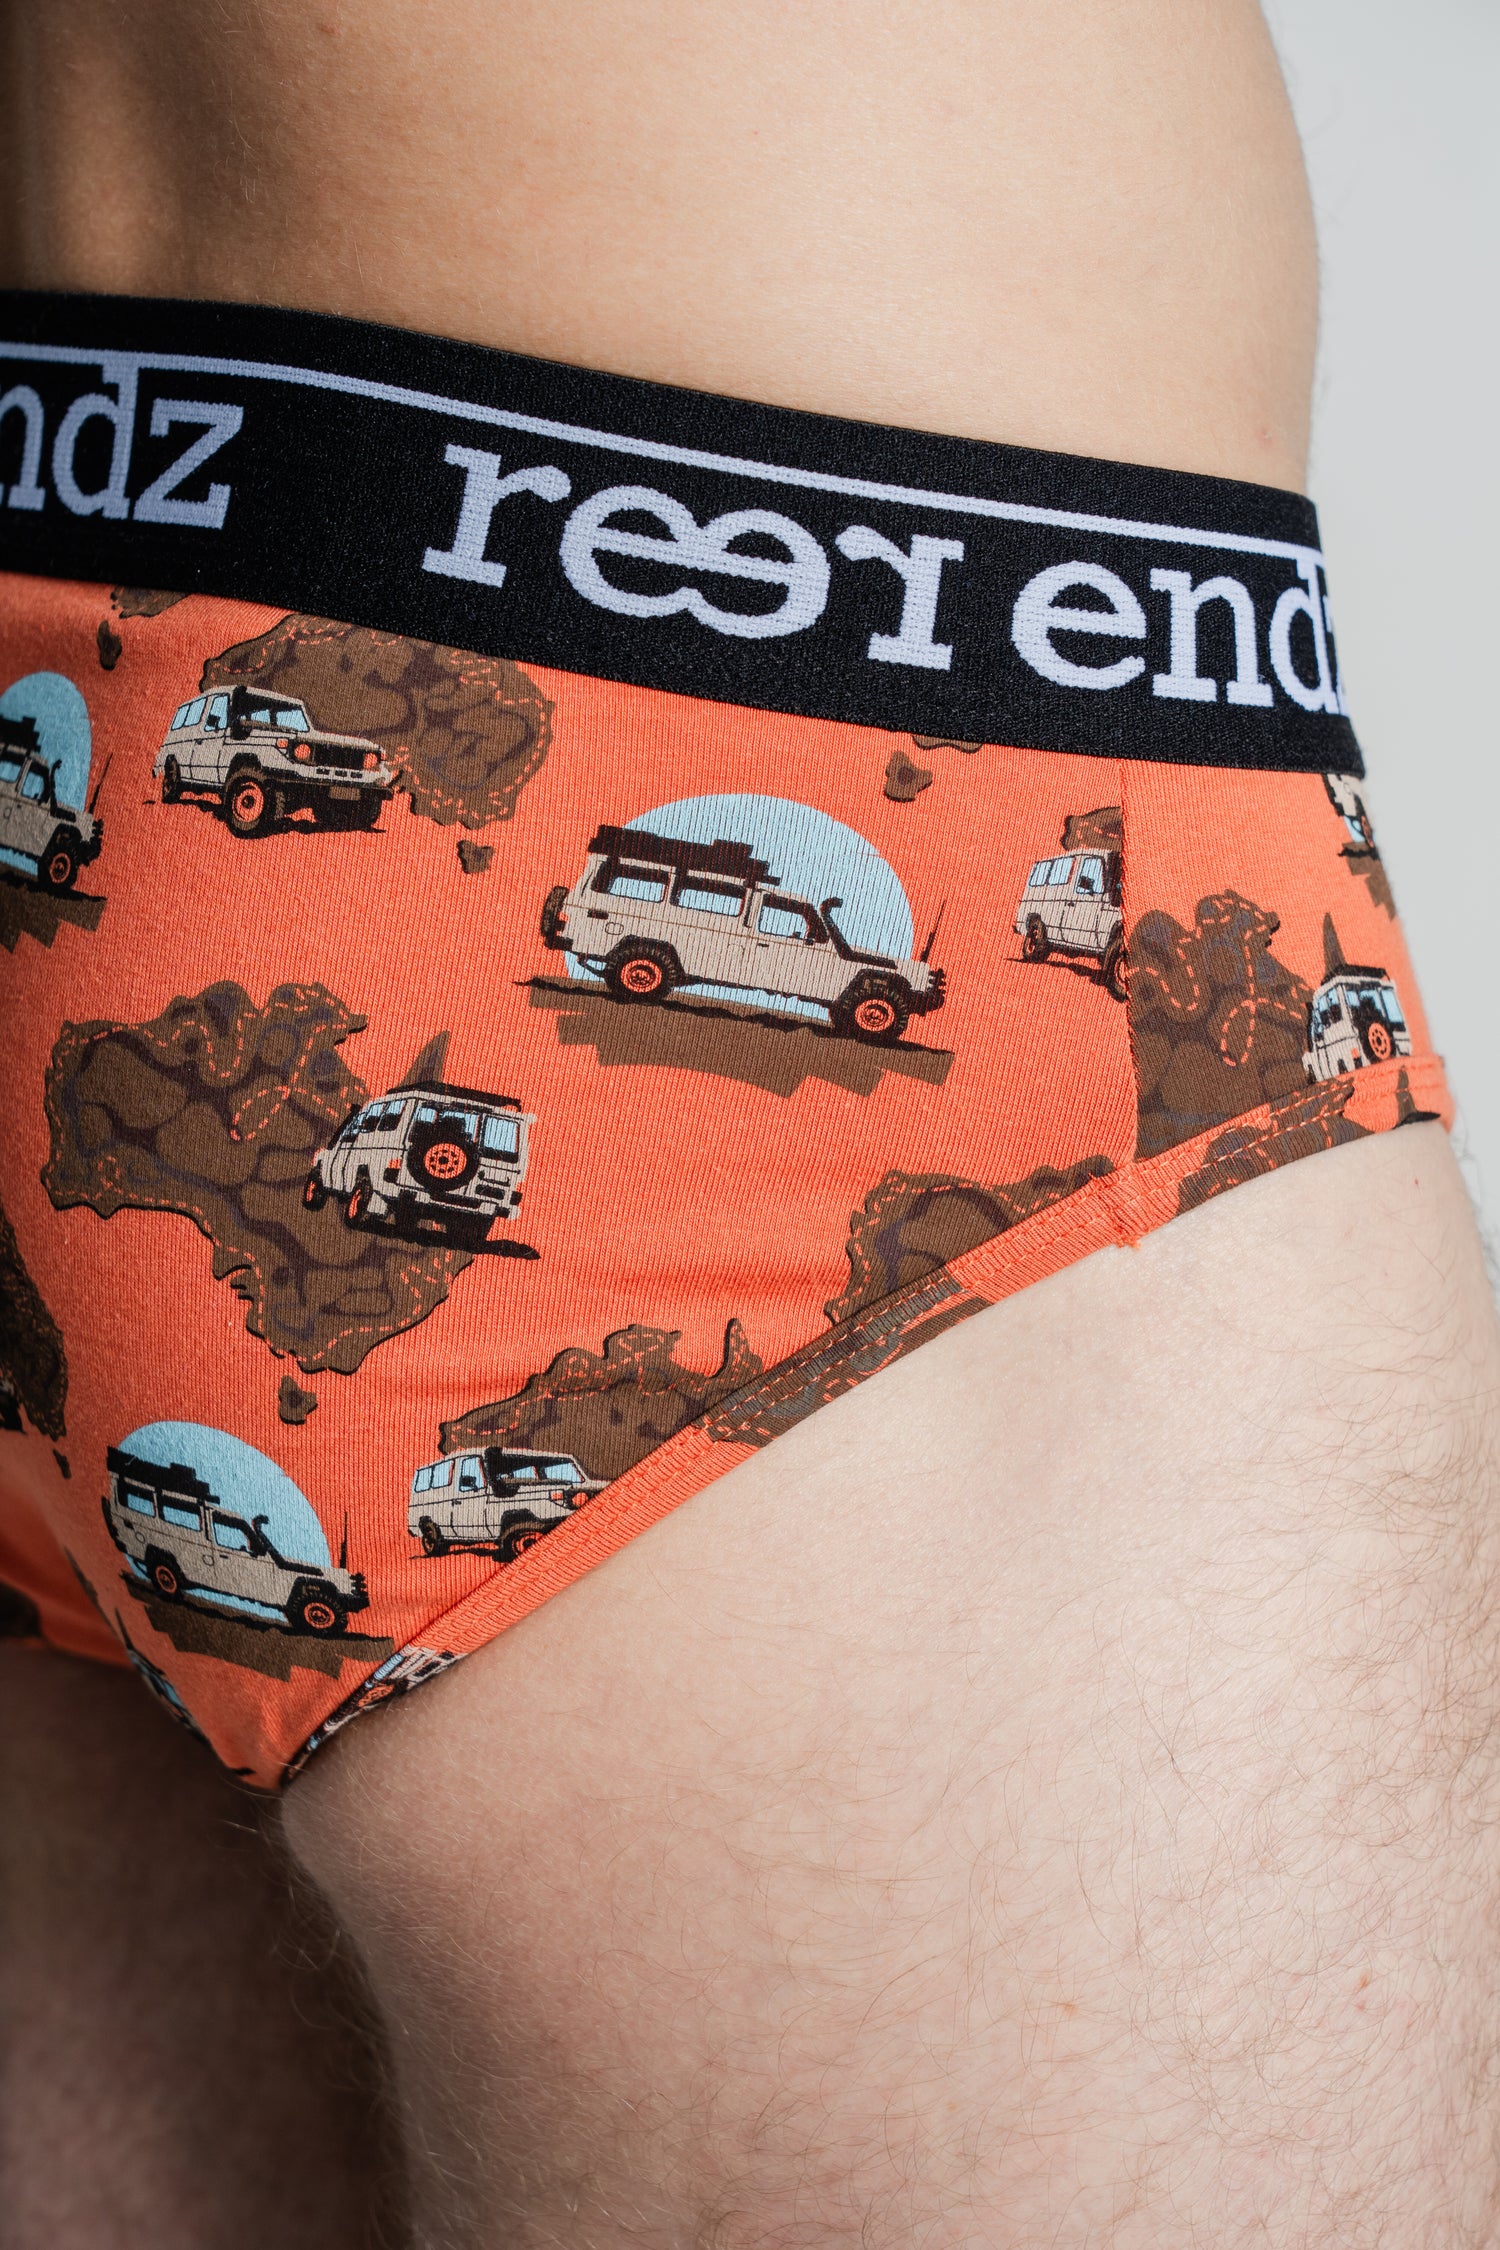 Elevate your wardrobe with the 'Cruisin' Organic Cotton Men's Brief, modeled for maximum style and comfort.